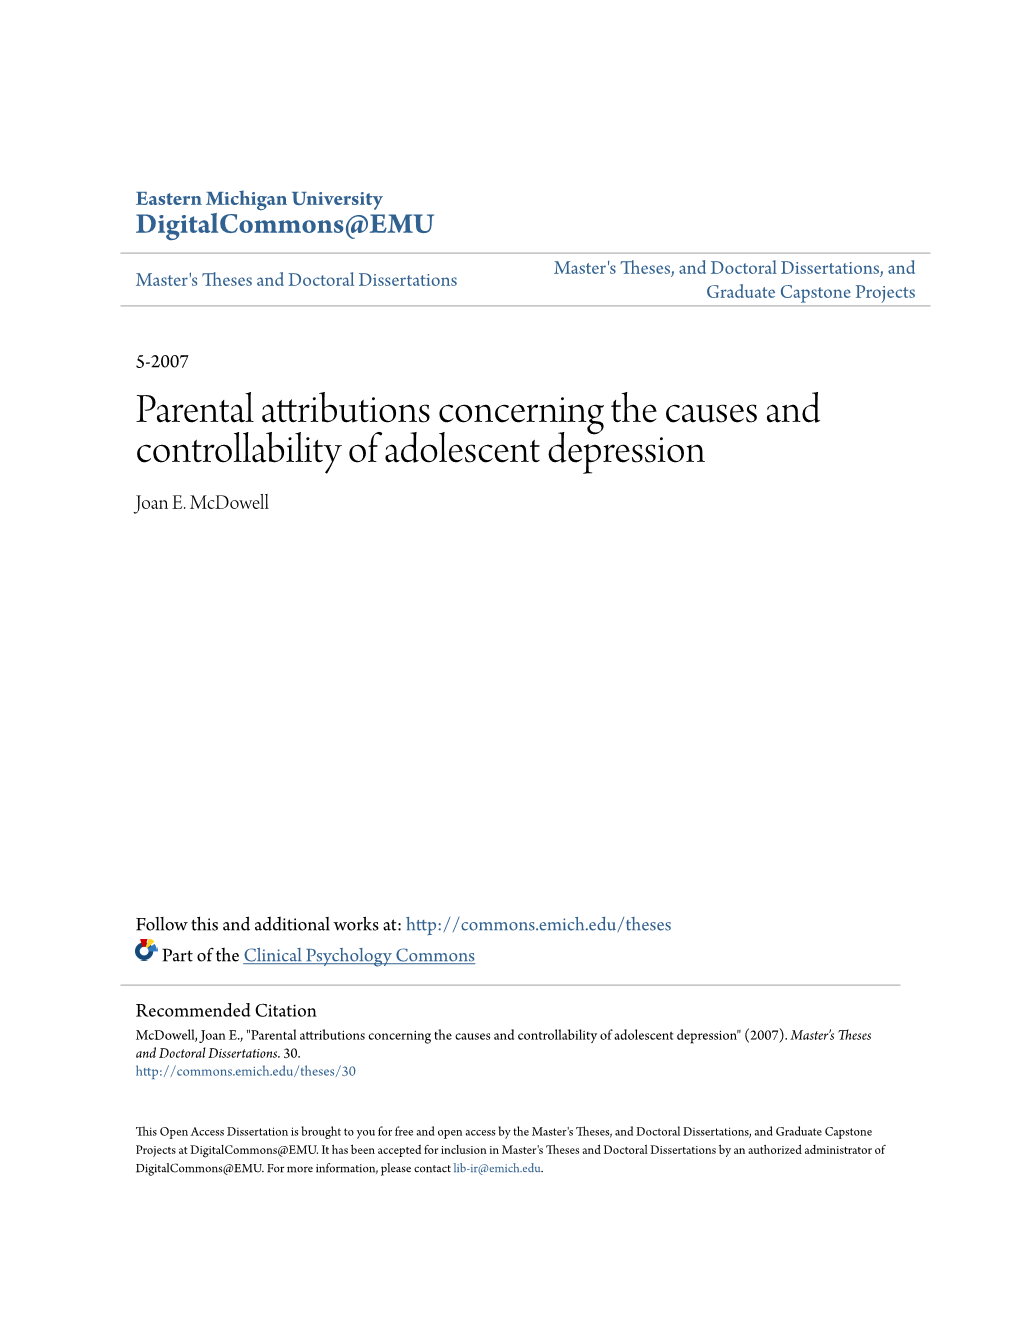 Parental Attributions Concerning the Causes and Controllability of Adolescent Depression Joan E